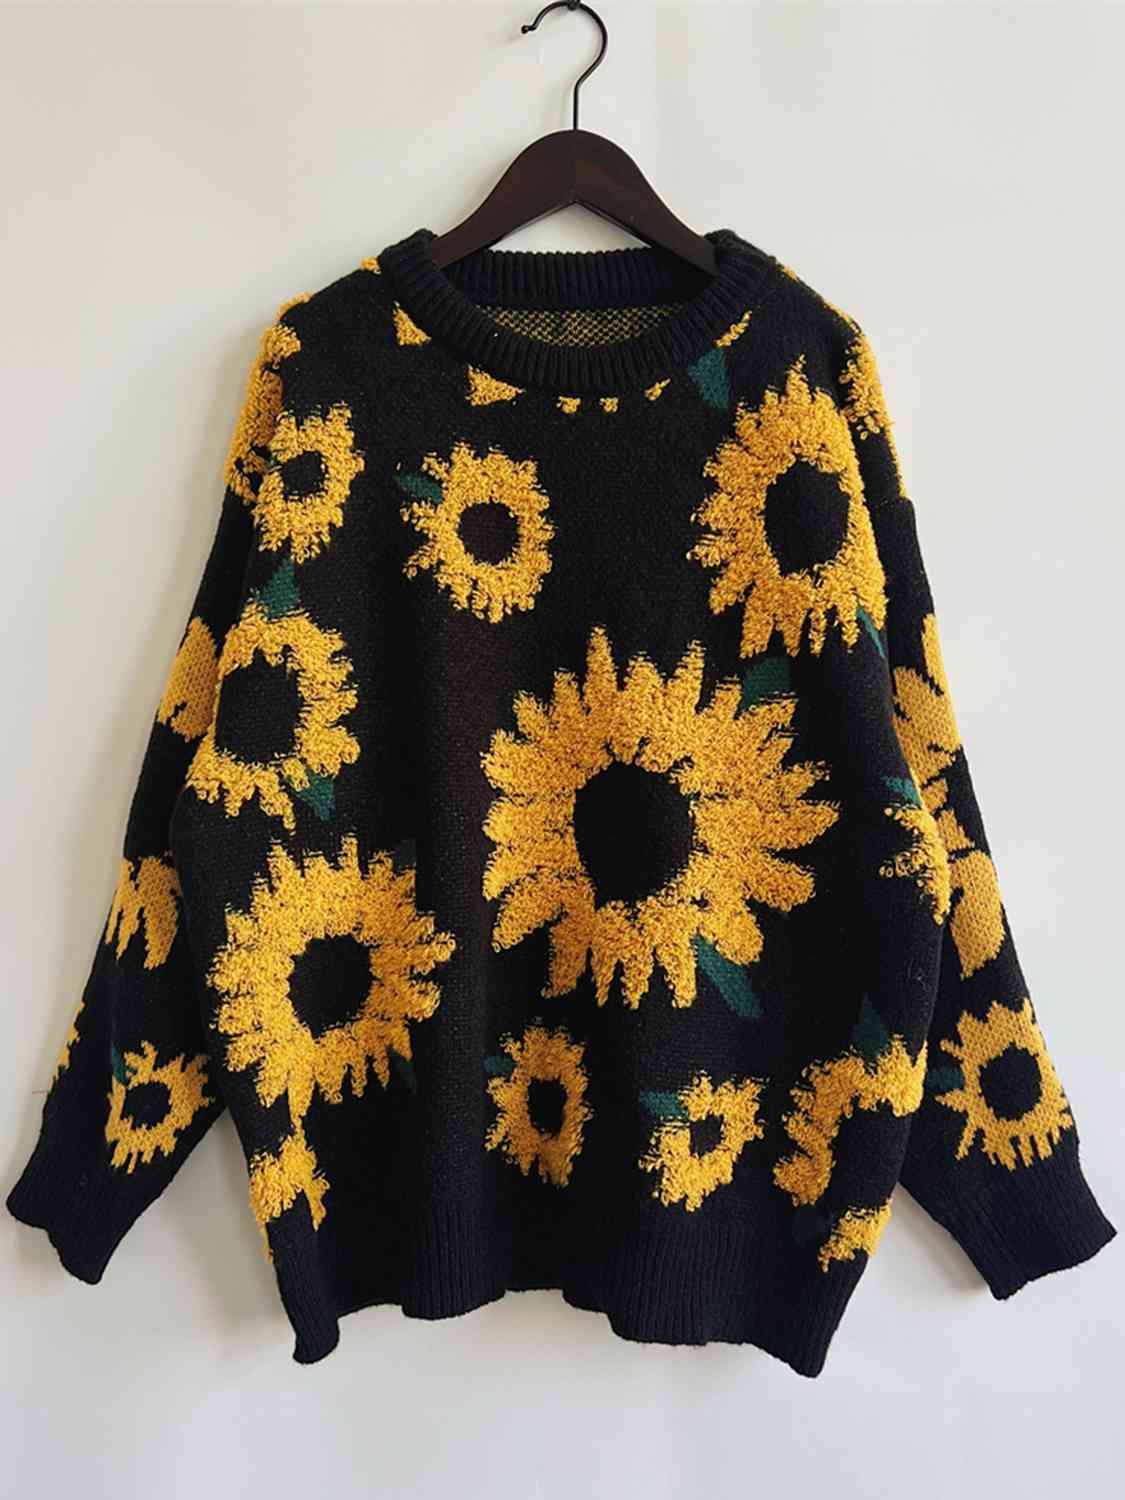 Sunflower Dropped Shoulder Long Sleeve Sweater